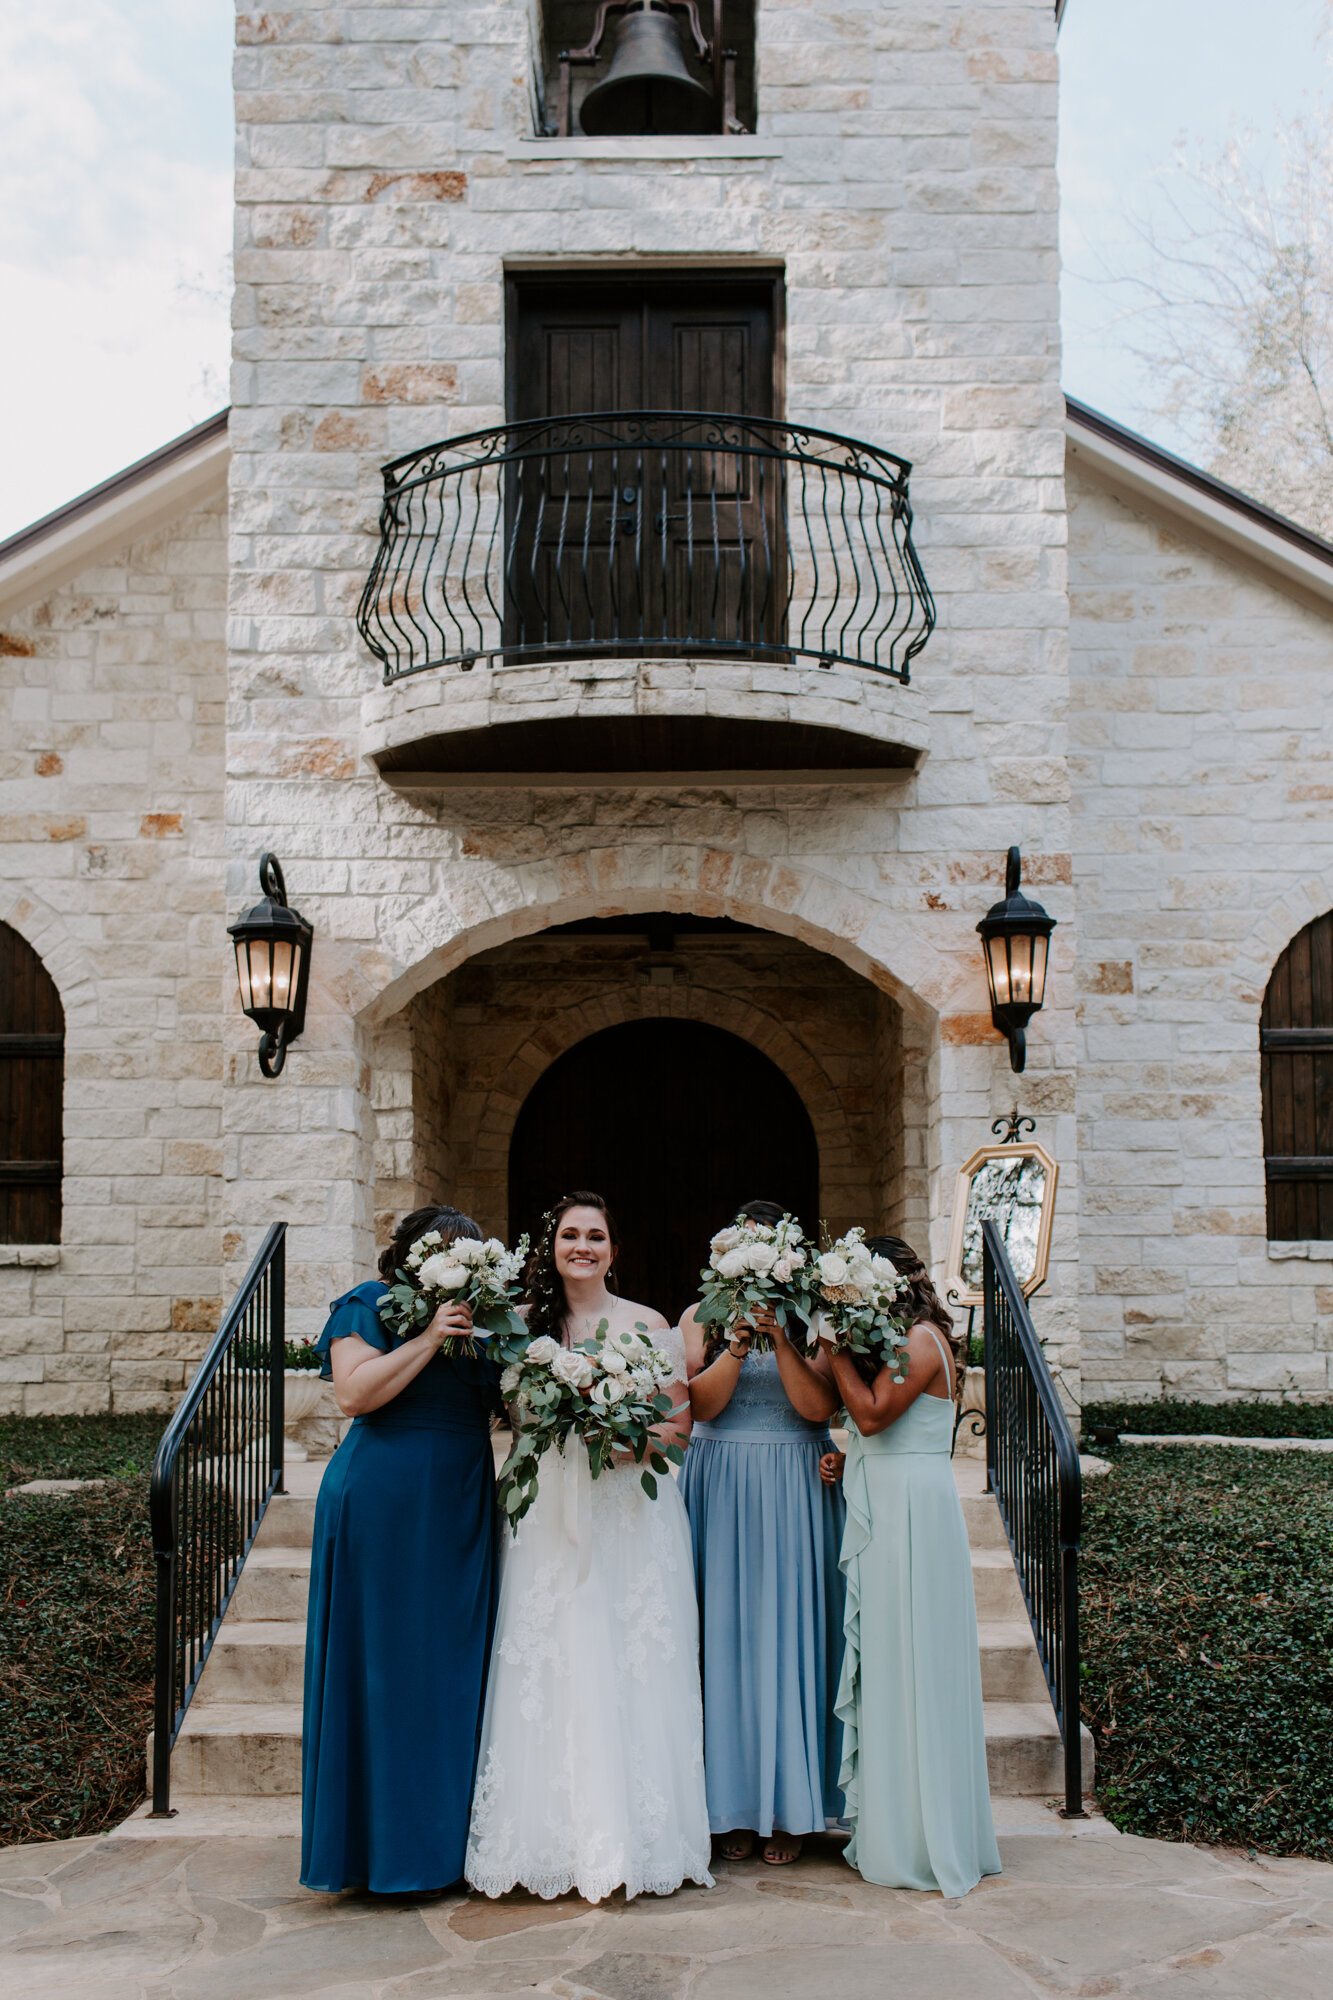 Bride ad bridesmaids in front of the bell tower. Fairy Romantic Wedding at Magnolia Bells in Magnolia, TX